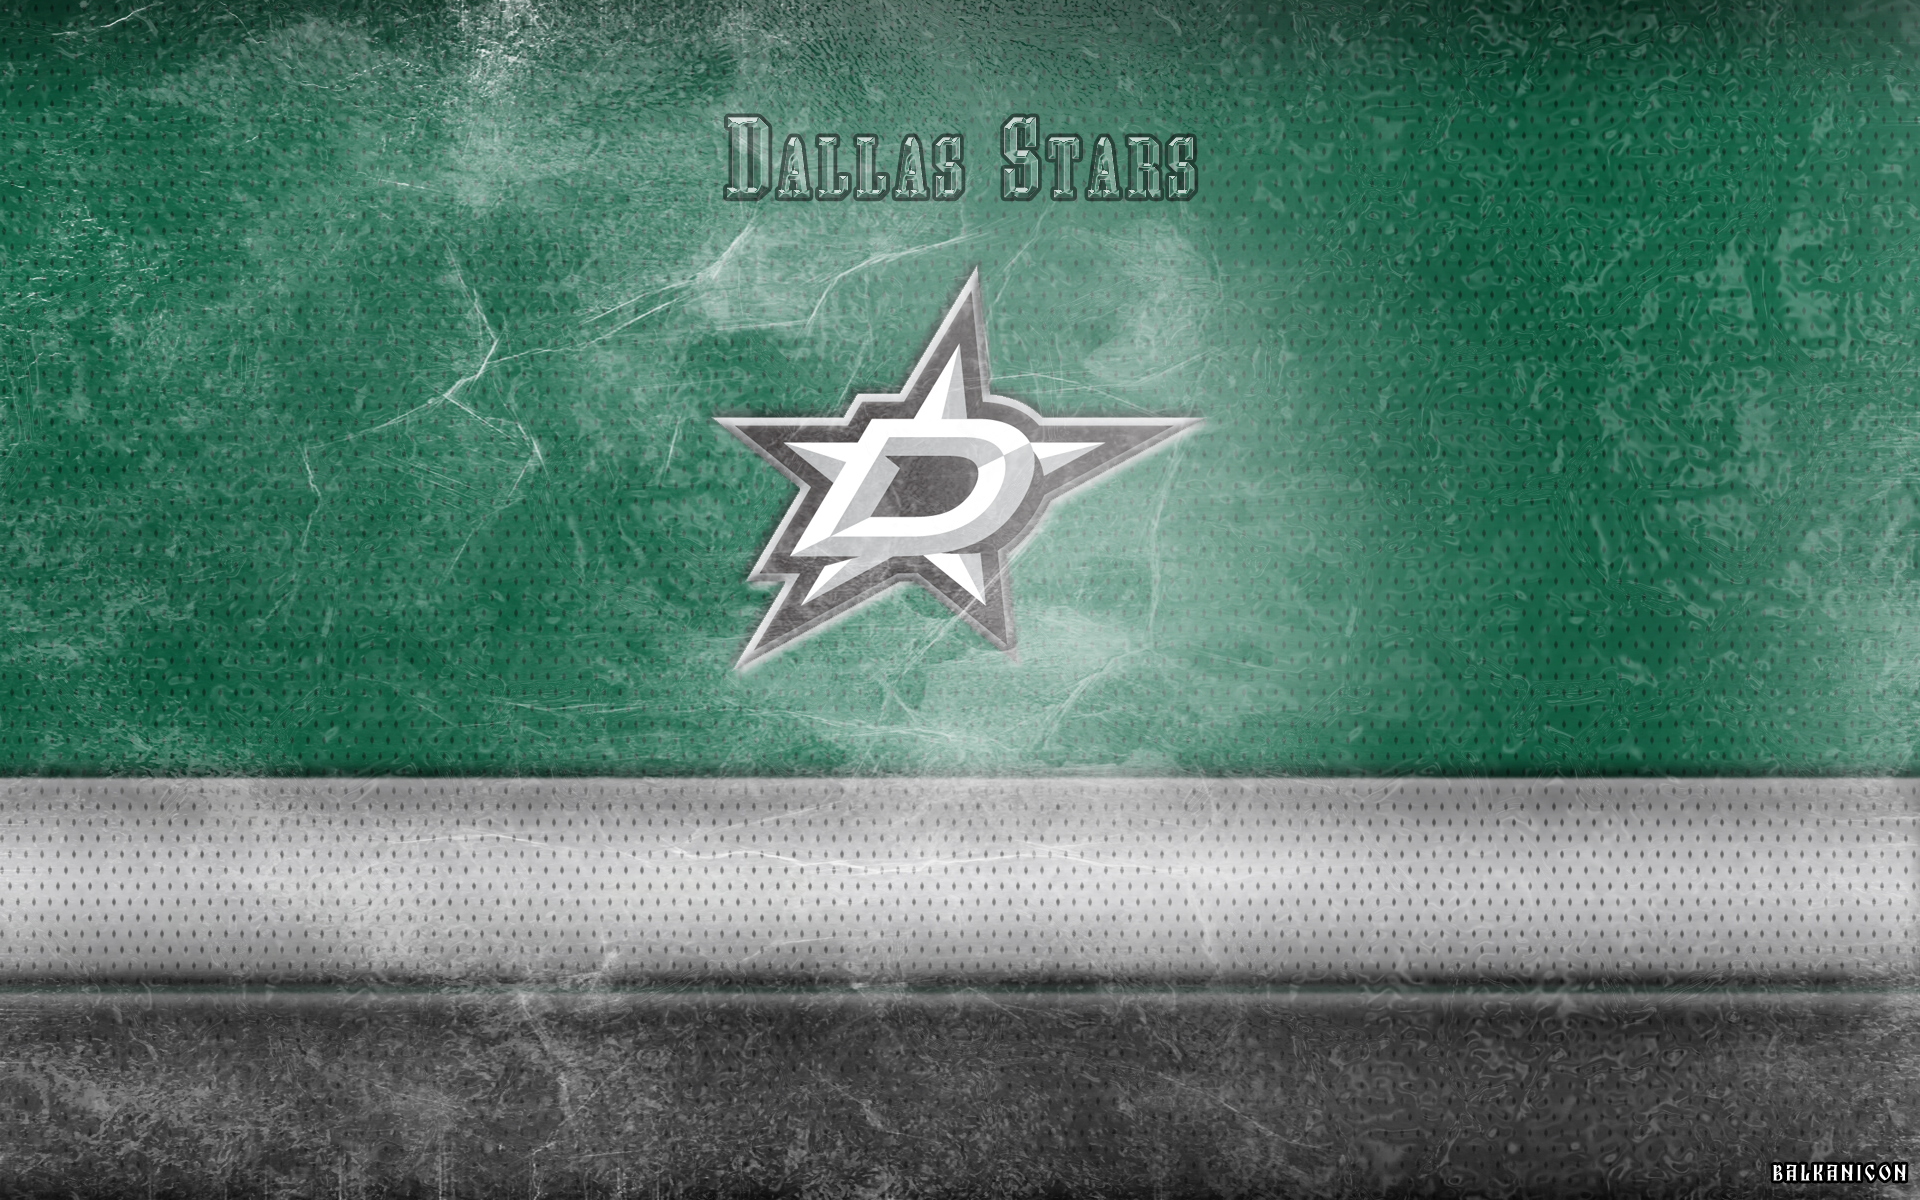 Dallas Stars Wallpapers Widescreen MNCP493 4USkY